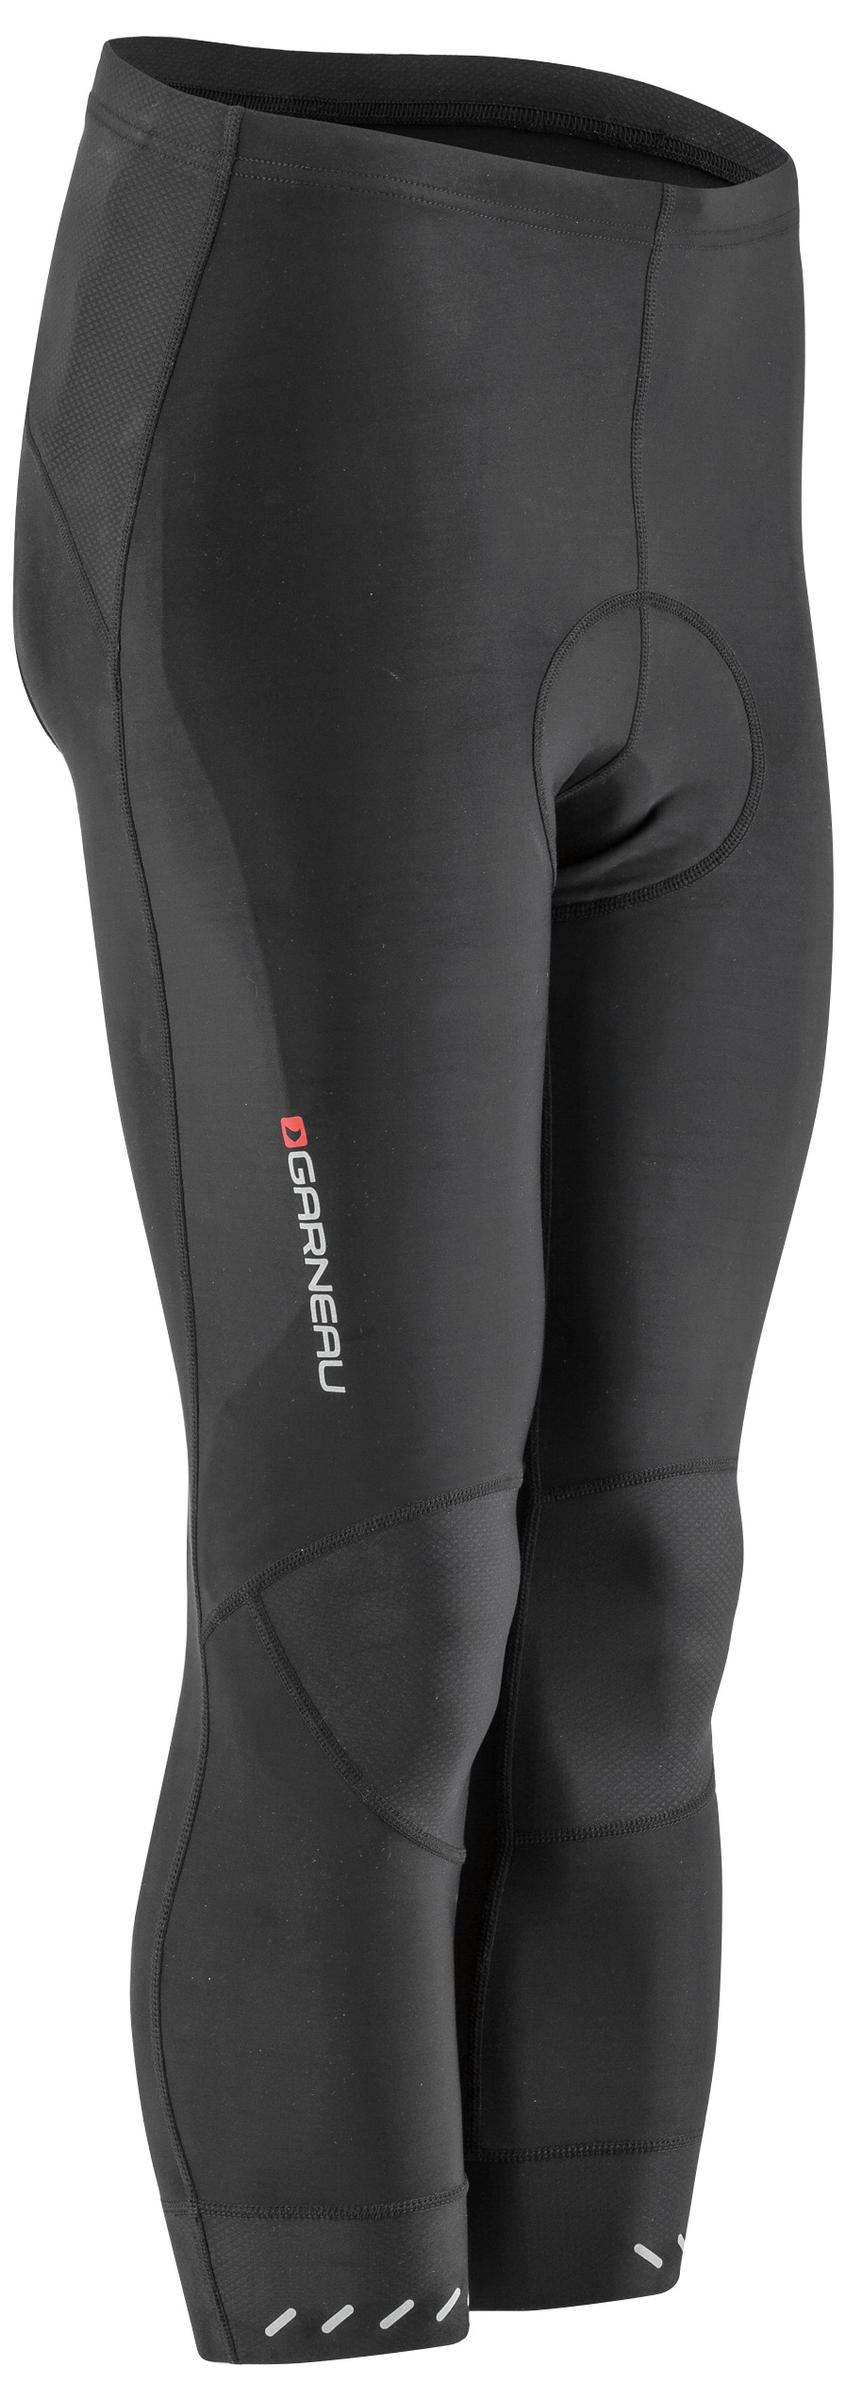 Garneau Quantum Cycling Knickers - Mello Velo Bicycle Shop & Cafe